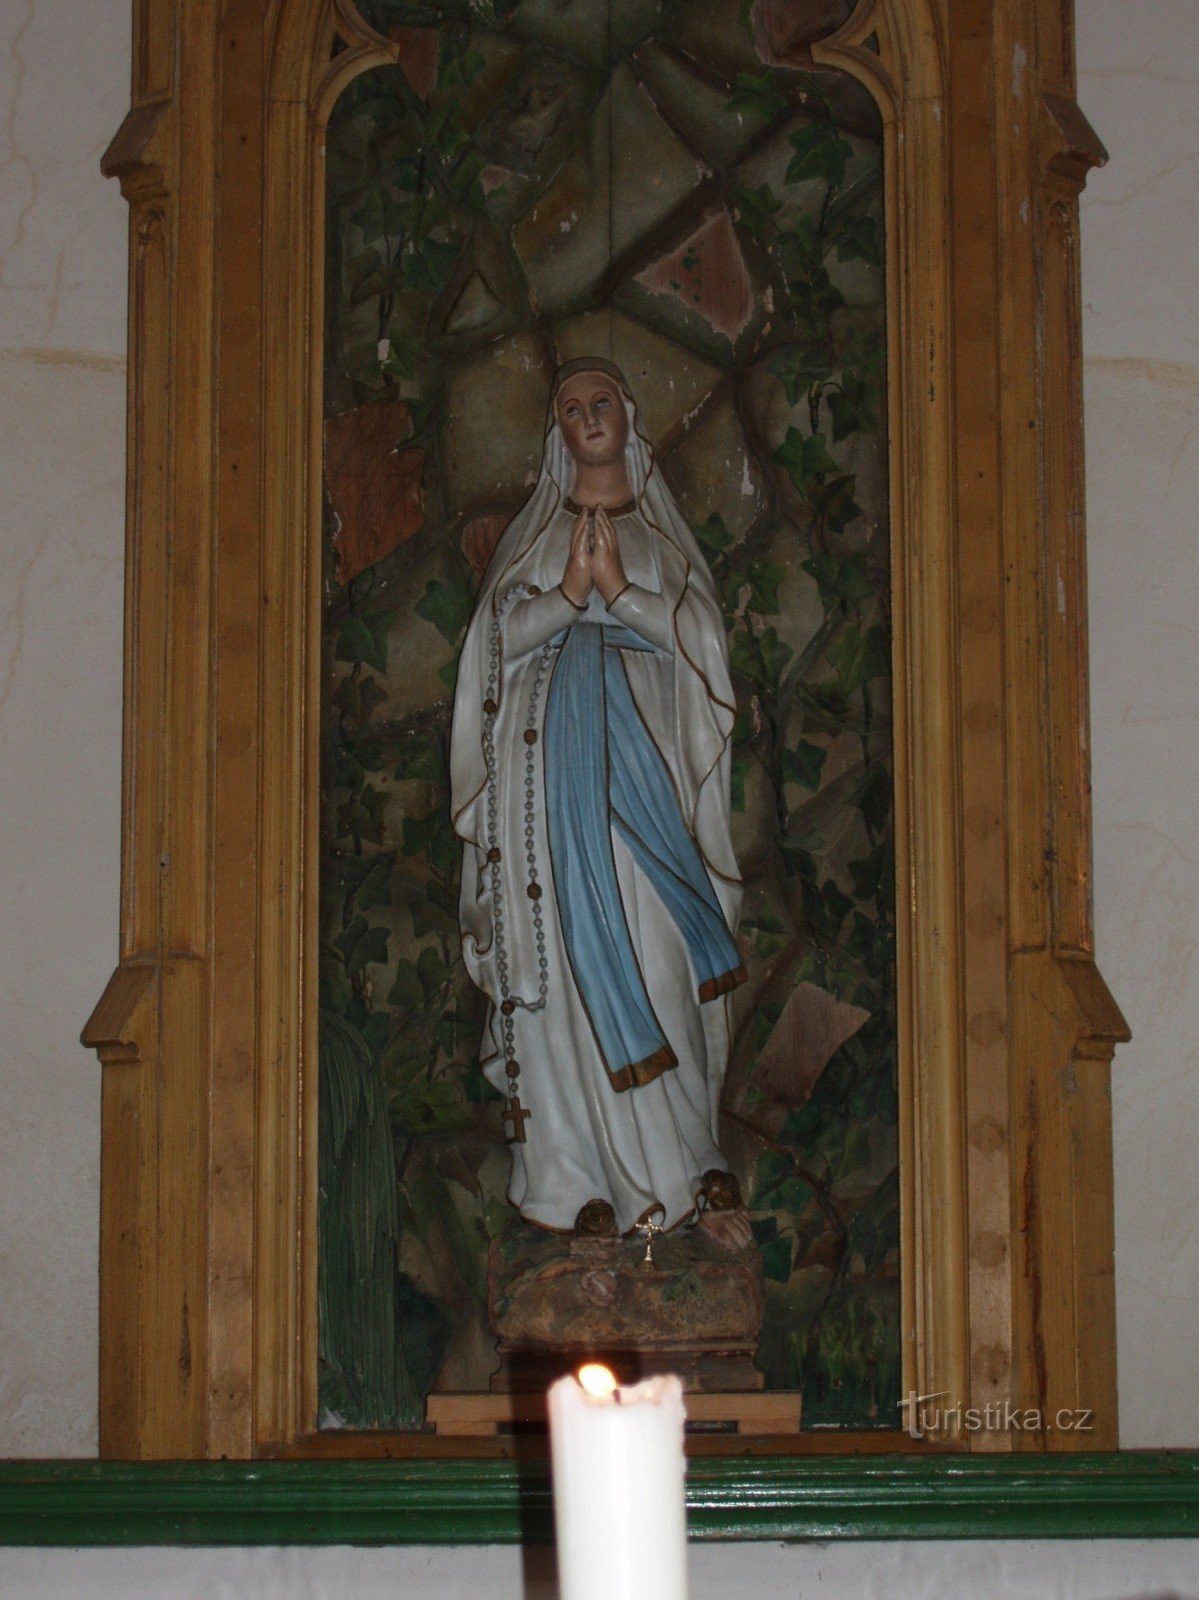 St. Anna in the chapel by the spring